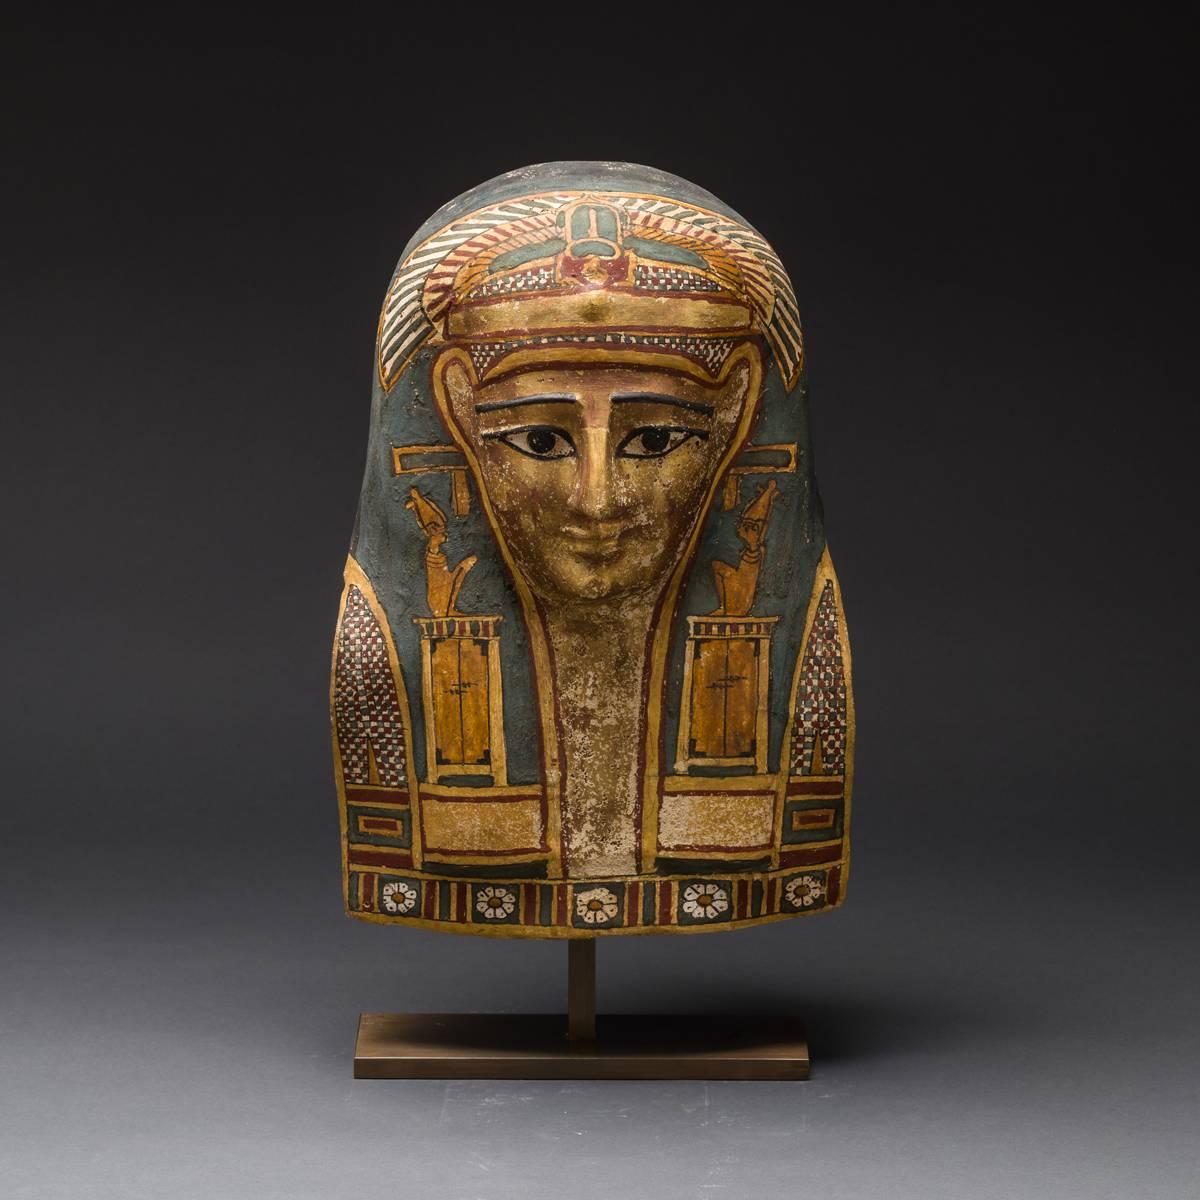 This well-preserved mummy mask was created from cartonnge, a kind of ancient Egyptian papier mâché in which layers of linen or recycled papyrus were combined with gesso, a type of plaster, in order to be modelled into a mummy mask used to cover